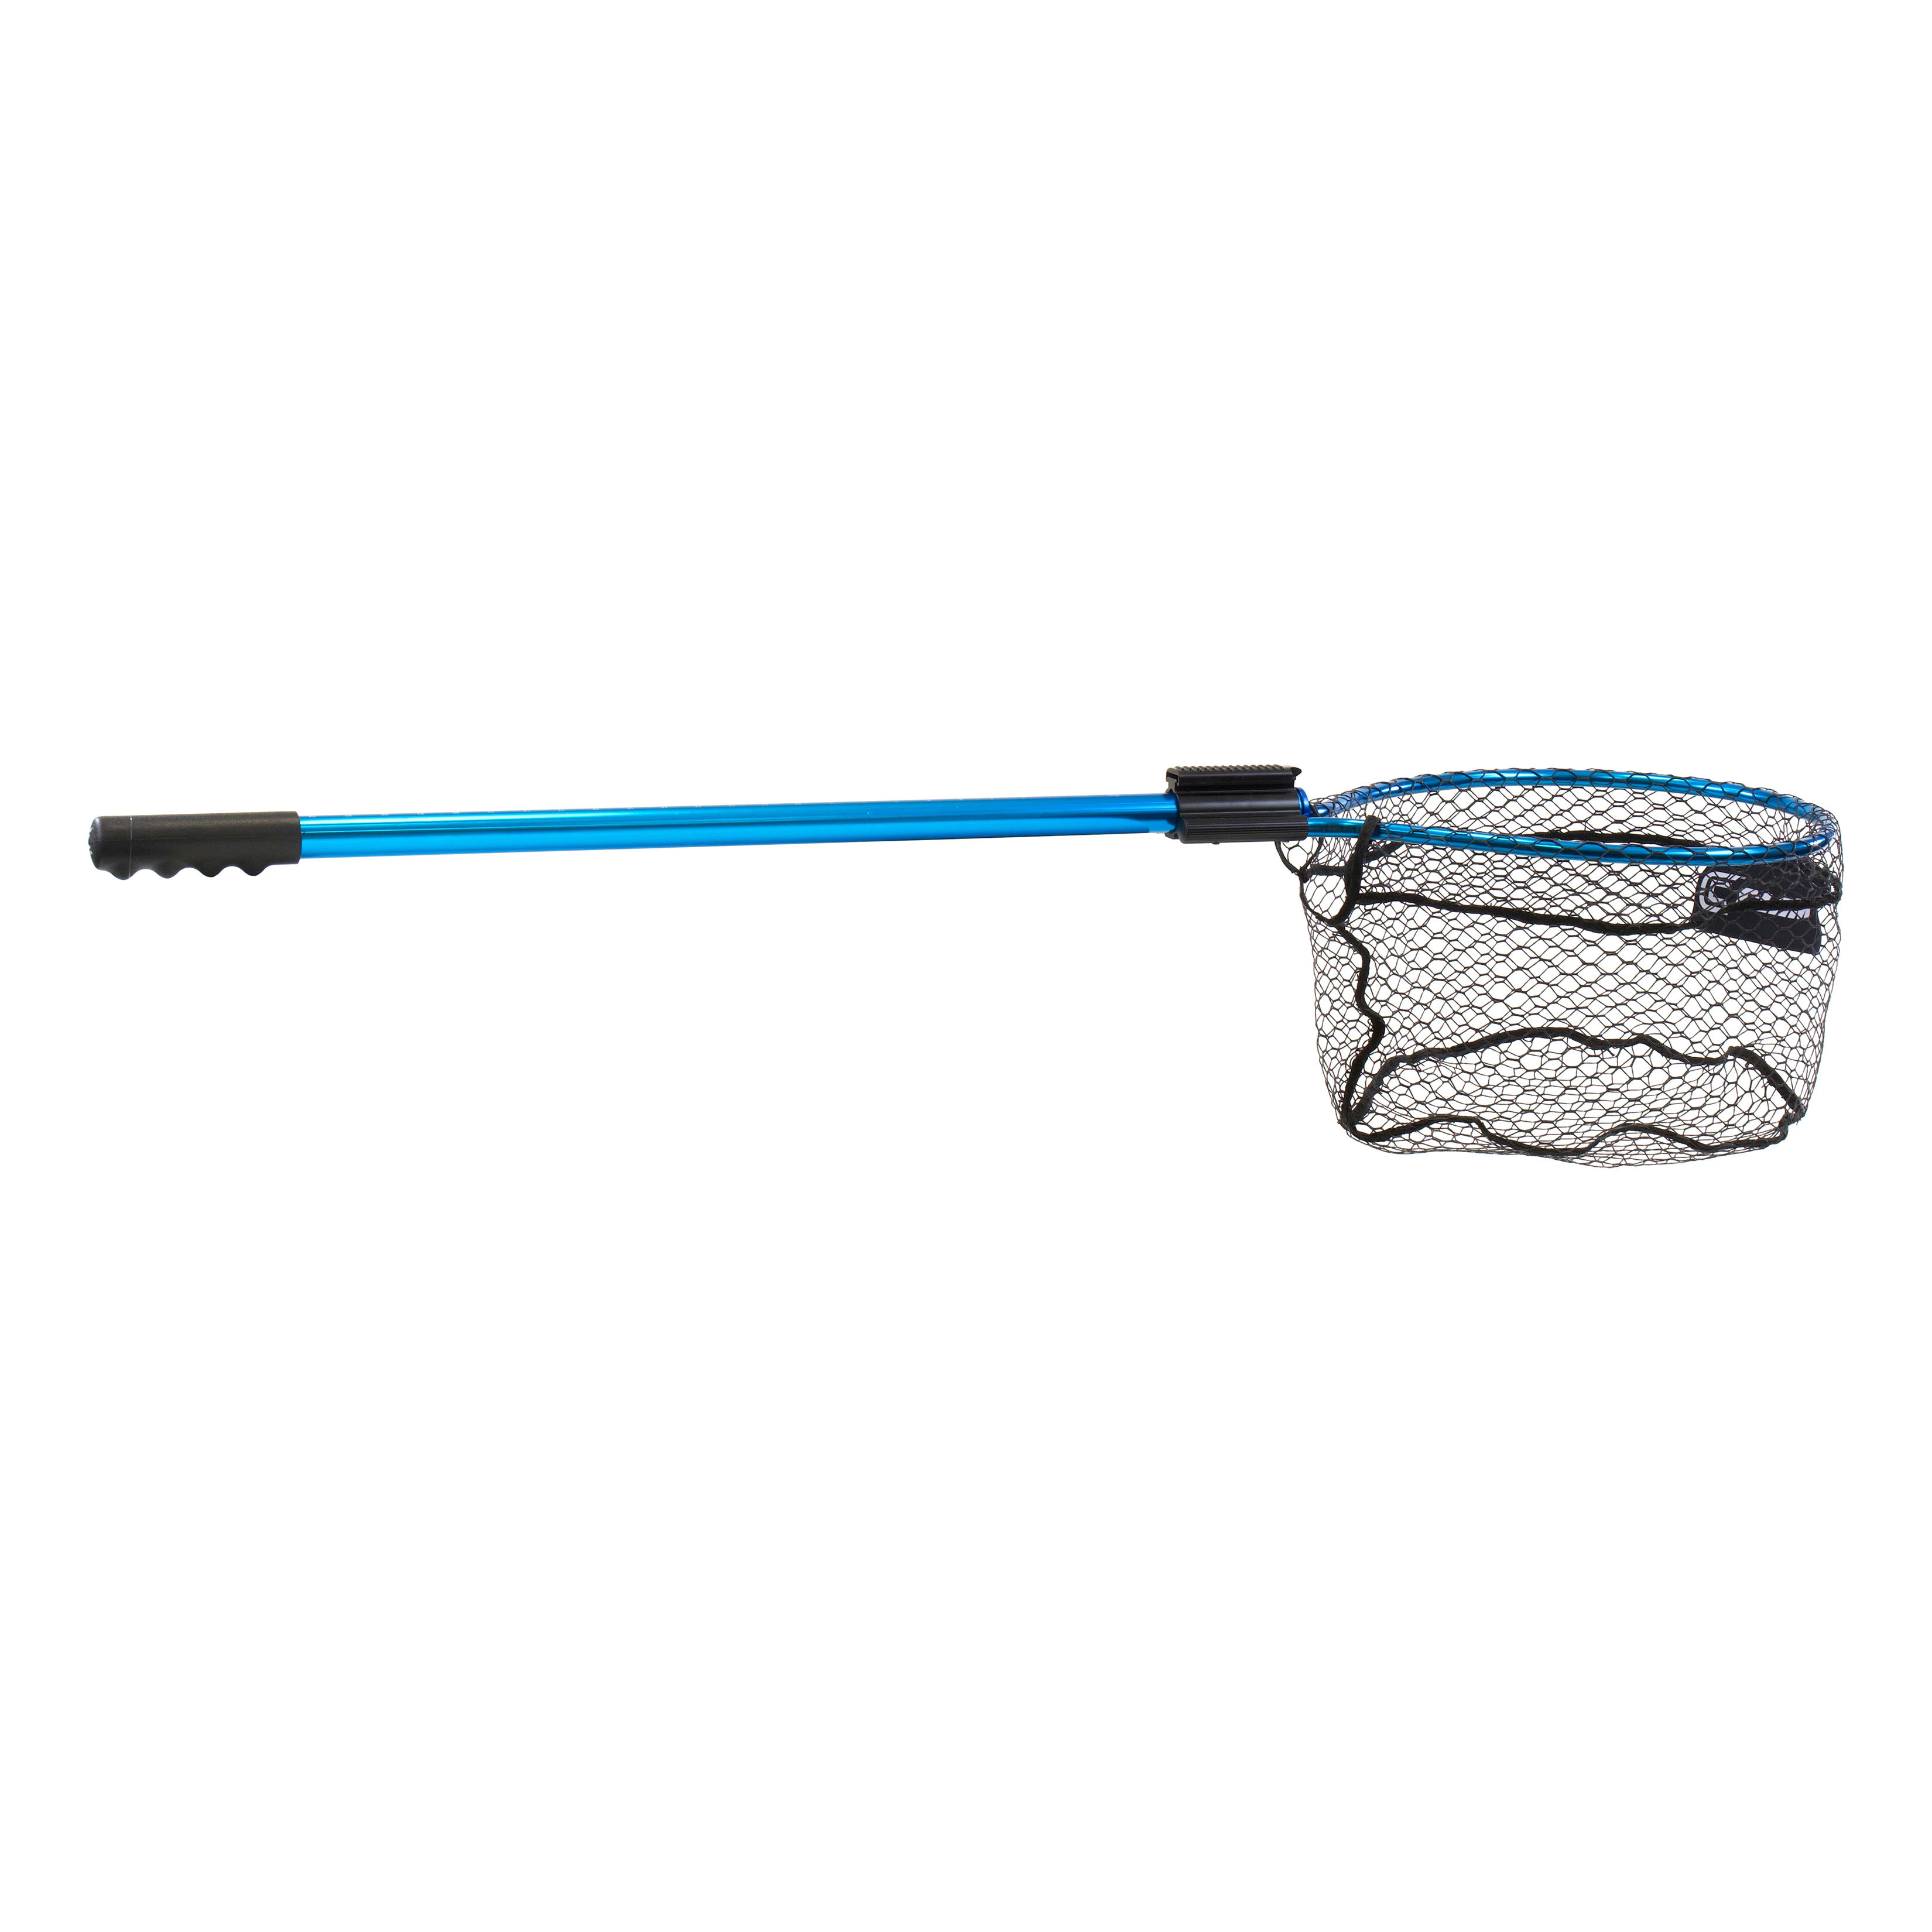 Clam Fortis Series Net